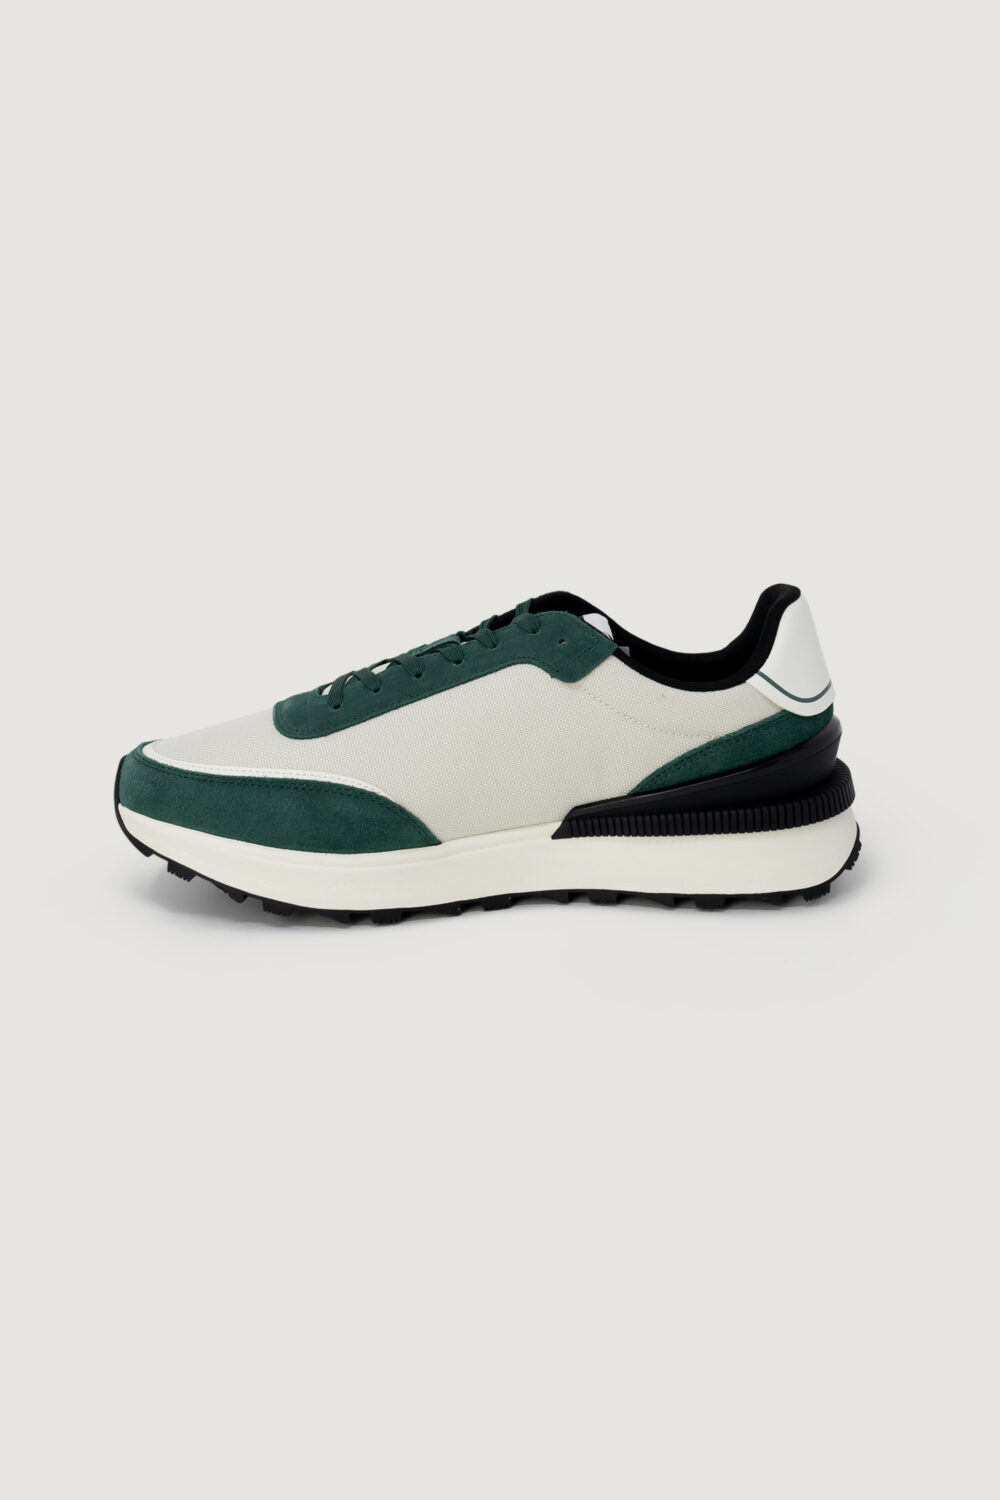 Sneakers Tommy Hilfiger Jeans TECHNICAL RUNNER Verde Scuro - Foto 4